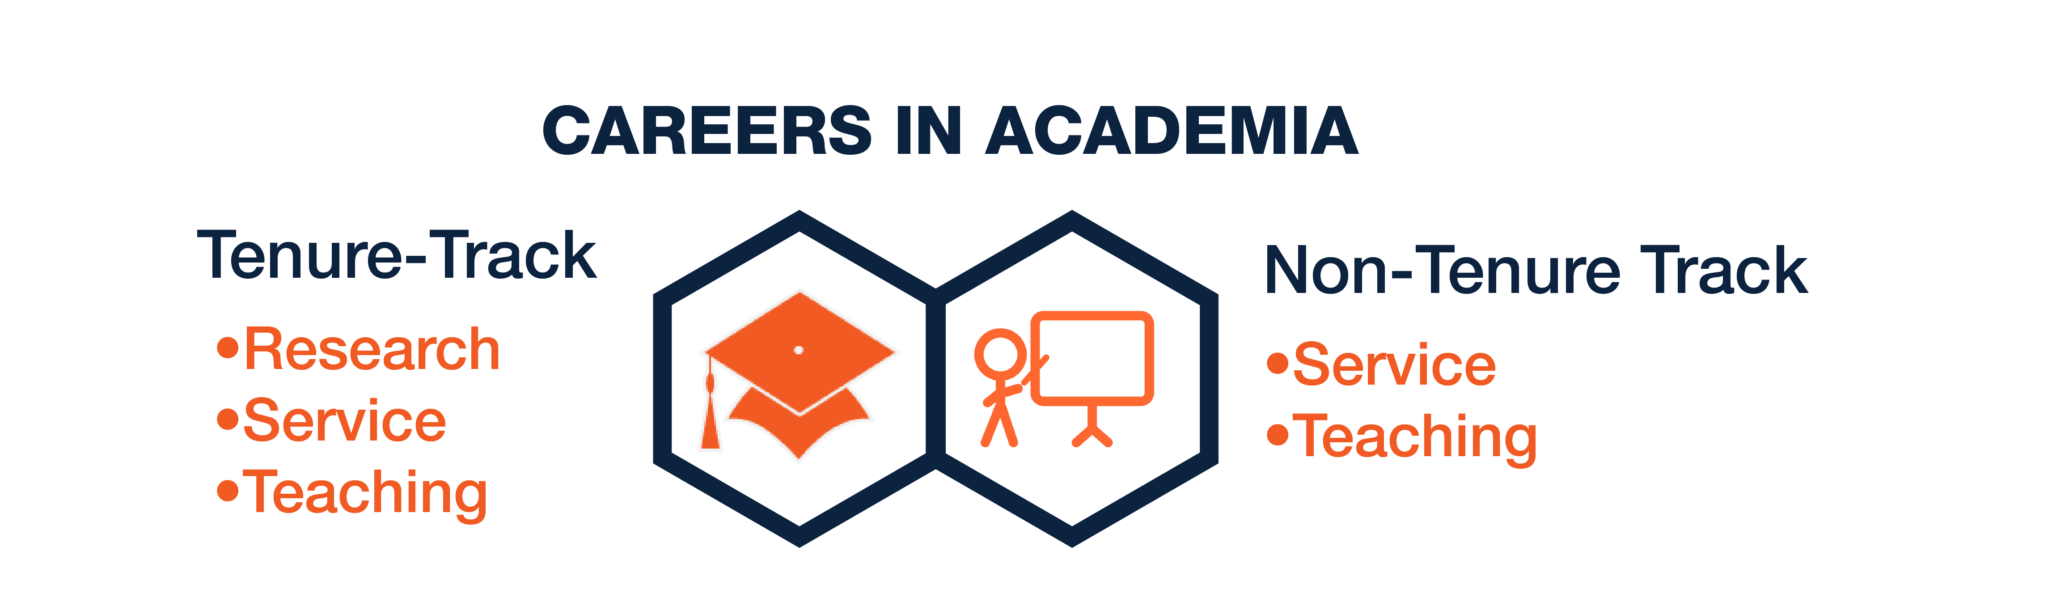 Careers in Academia include Tenure-Track (Research, Service and Learning) and Non-Tenure Track (Service and Teaching)